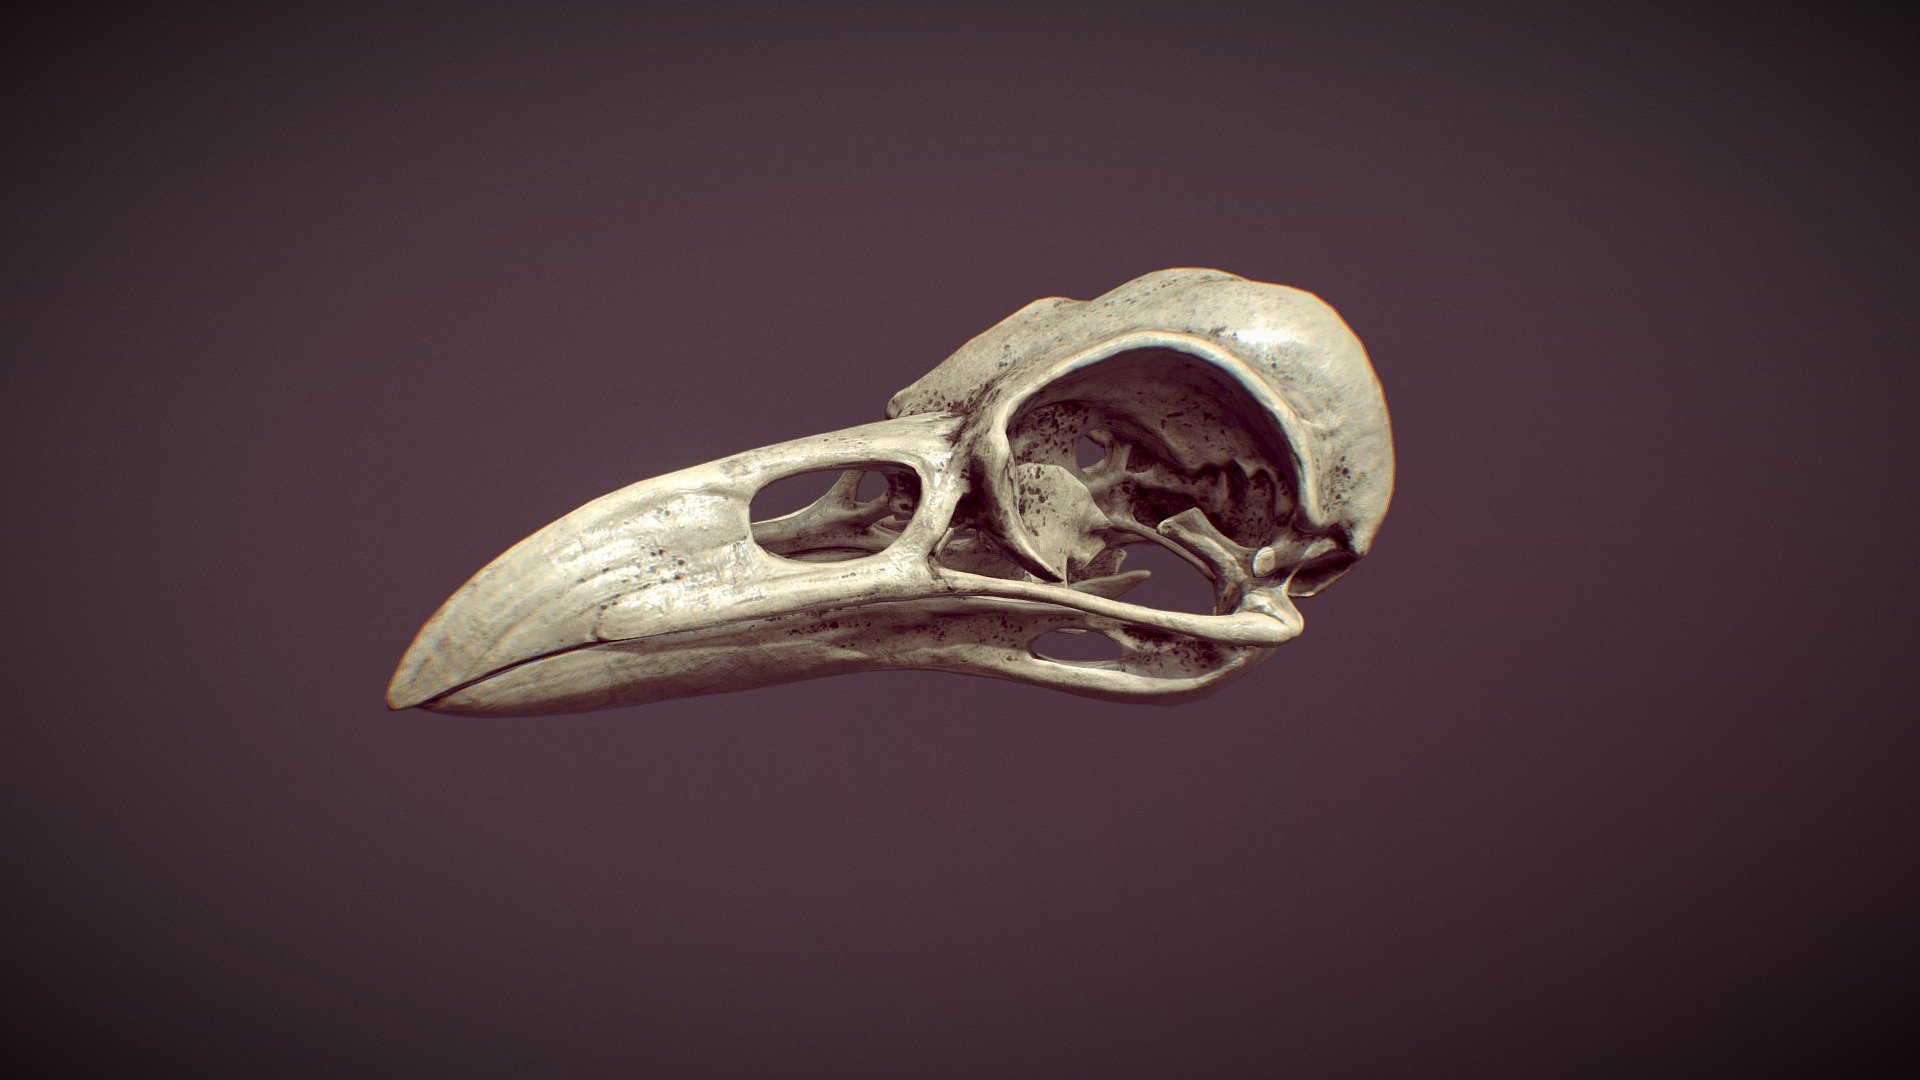 Crow skull
If you like it, you can print it Here via Shapeways - Crow skull - 3D model by justsantiago 3d model